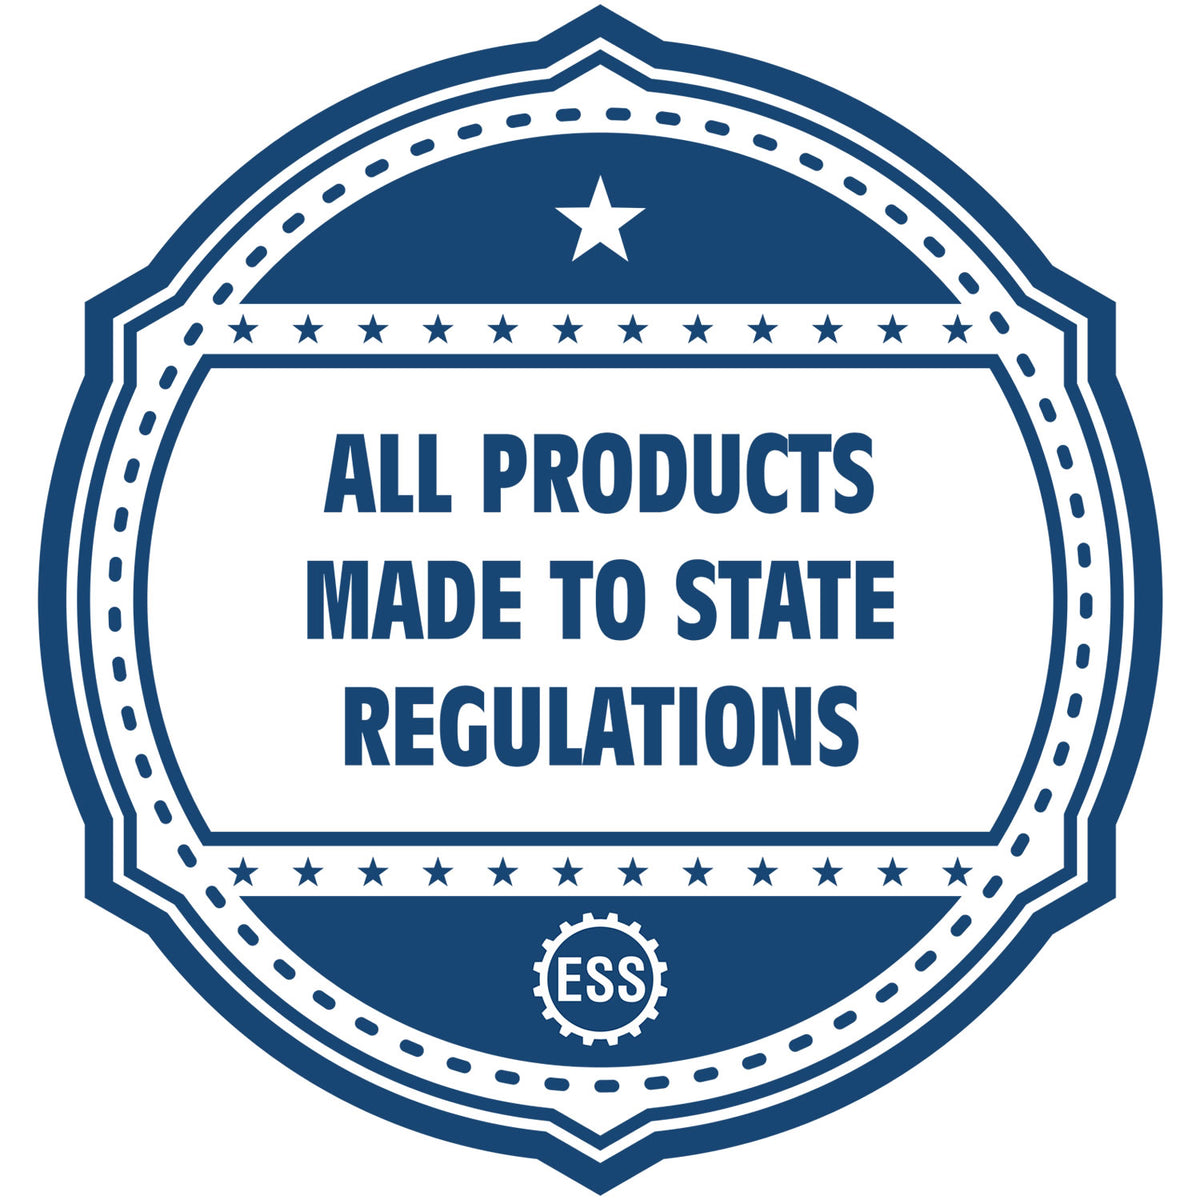 An icon or badge element for the MaxLight Premium Pre-Inked Wisconsin State Seal Notarial Stamp showing that this product is made in compliance with state regulations.